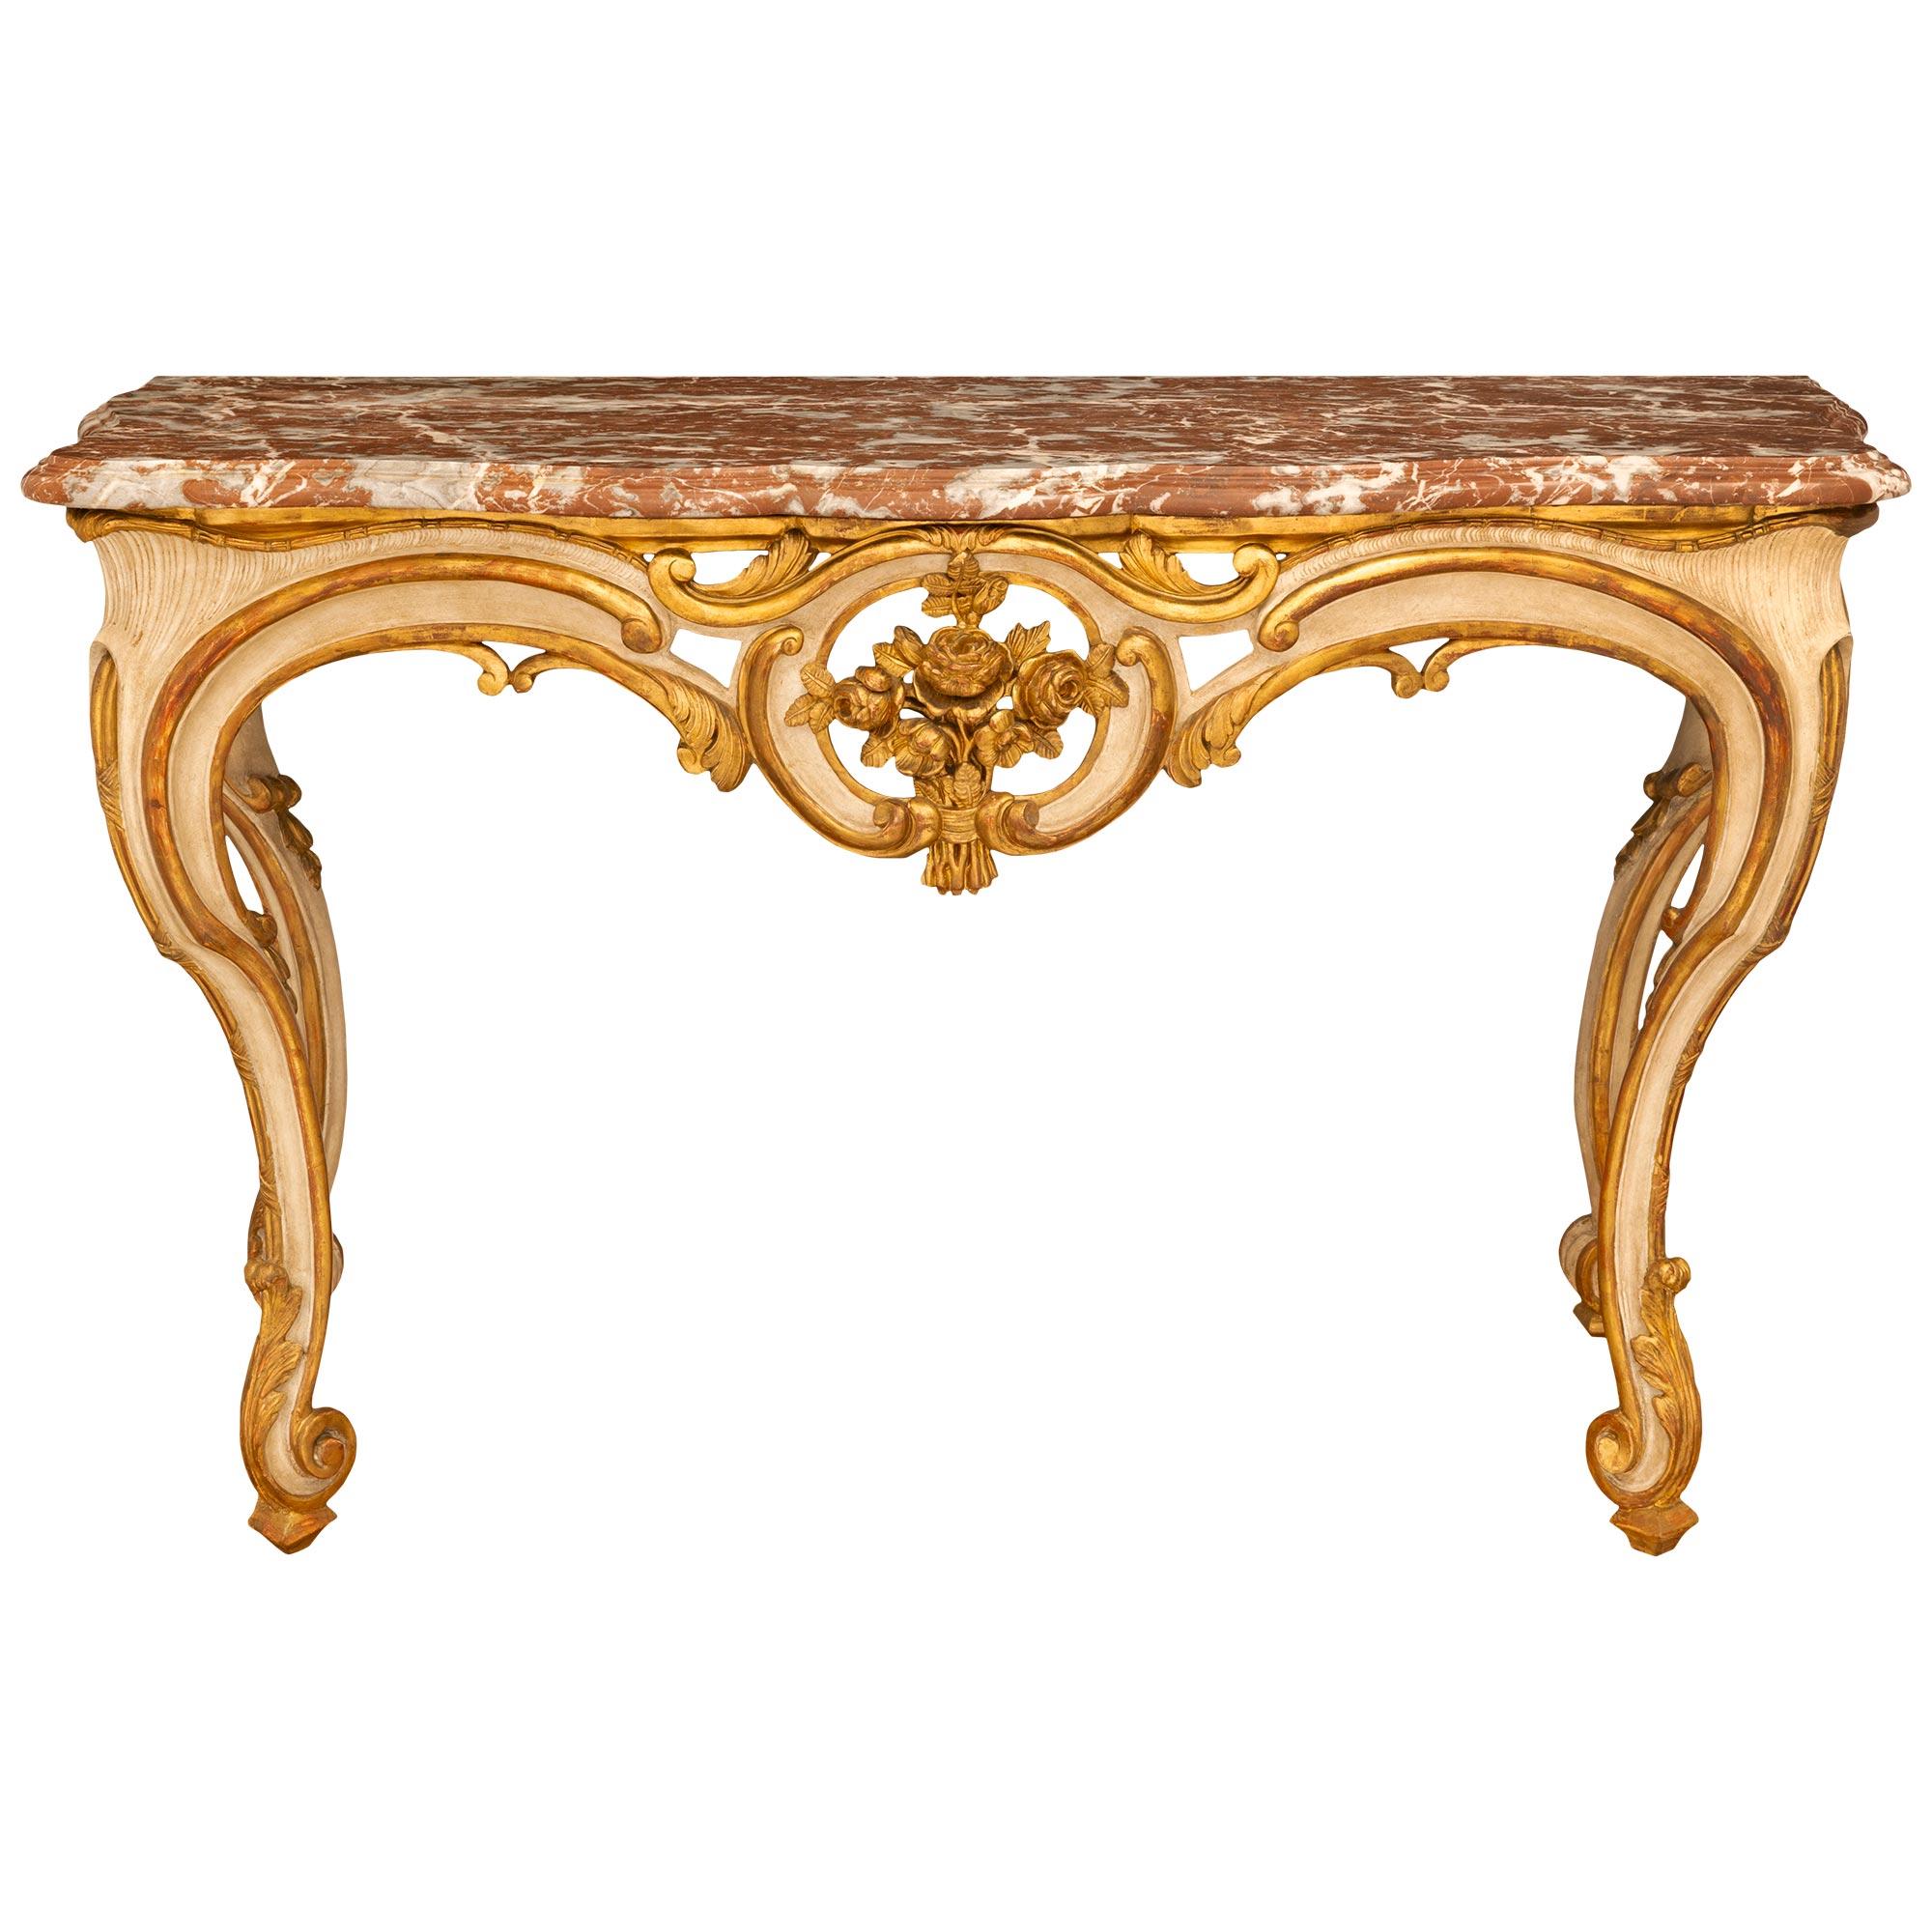 French 18th Century Louis XV Period Patinated Wood, Giltwood & Marble Console For Sale 7